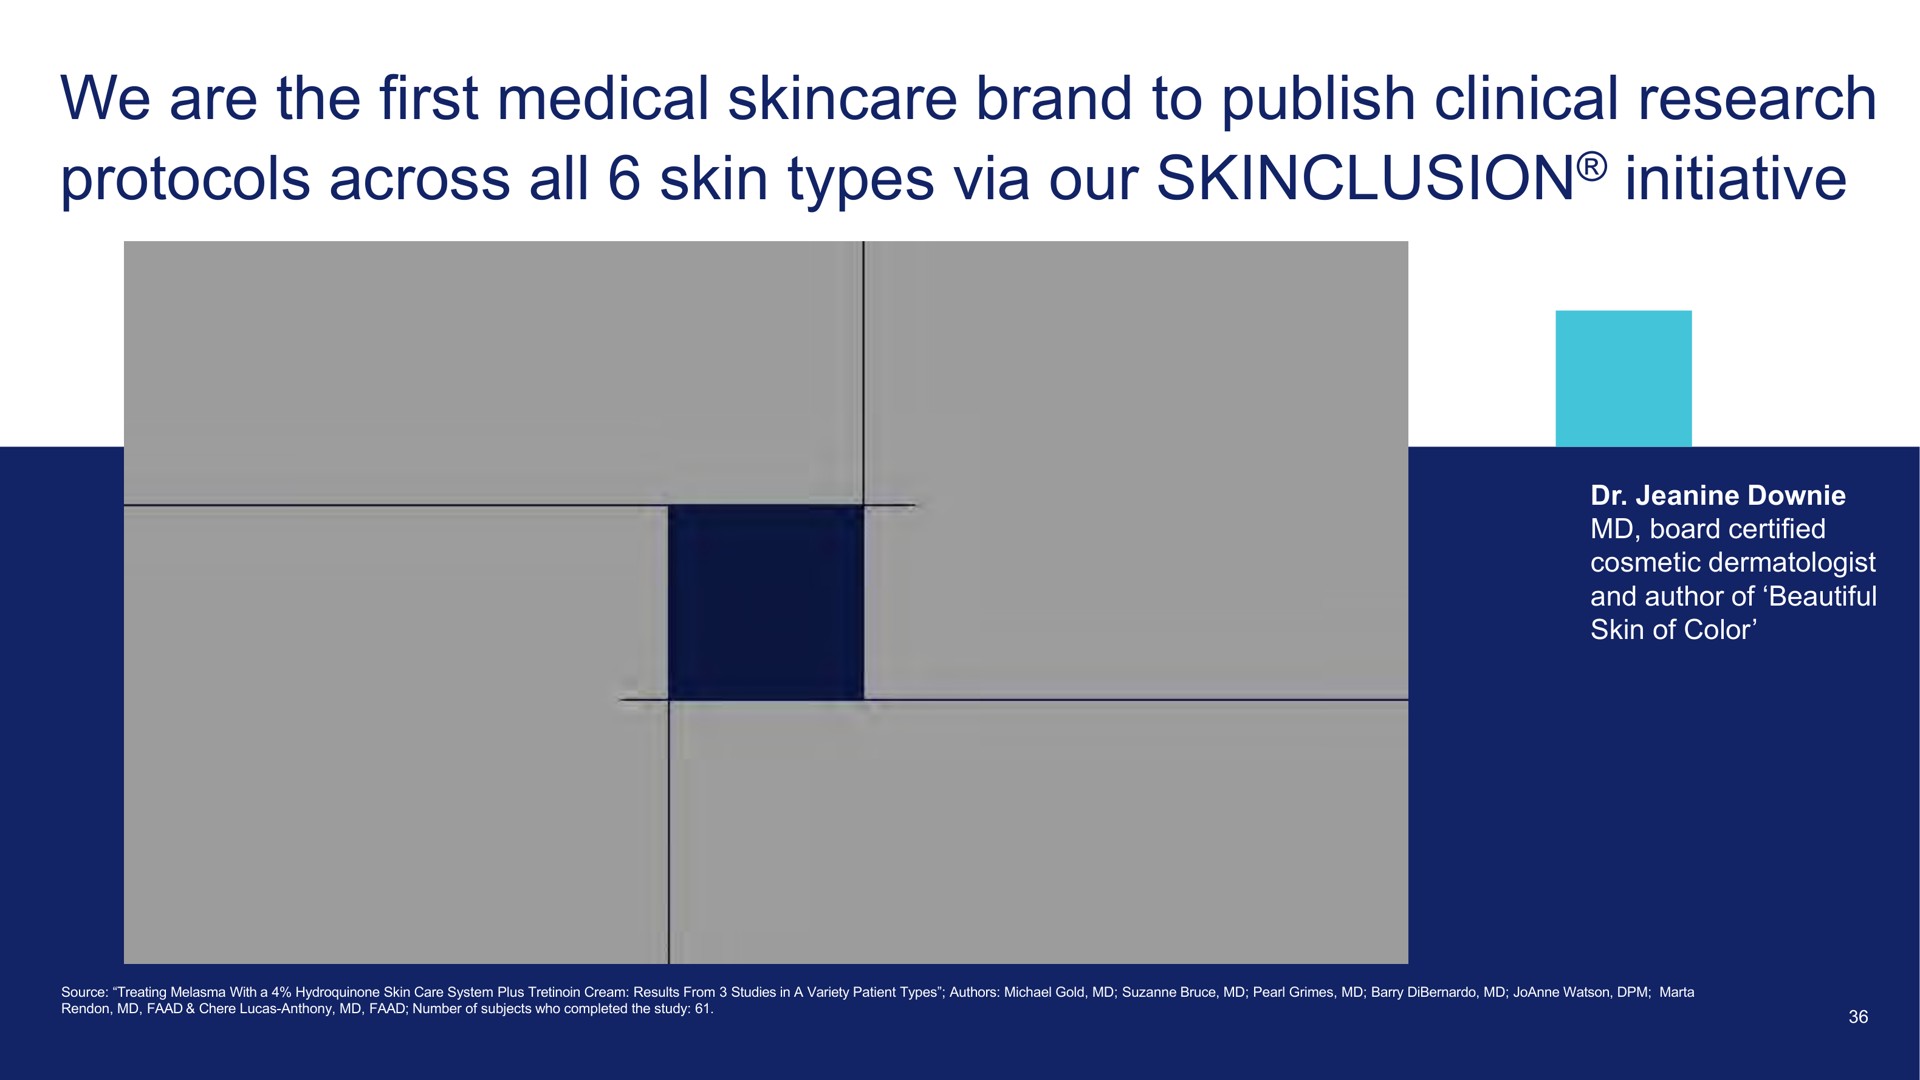 we are the first medical brand to publish clinical research protocols across all skin types via our initiative | Waldencast